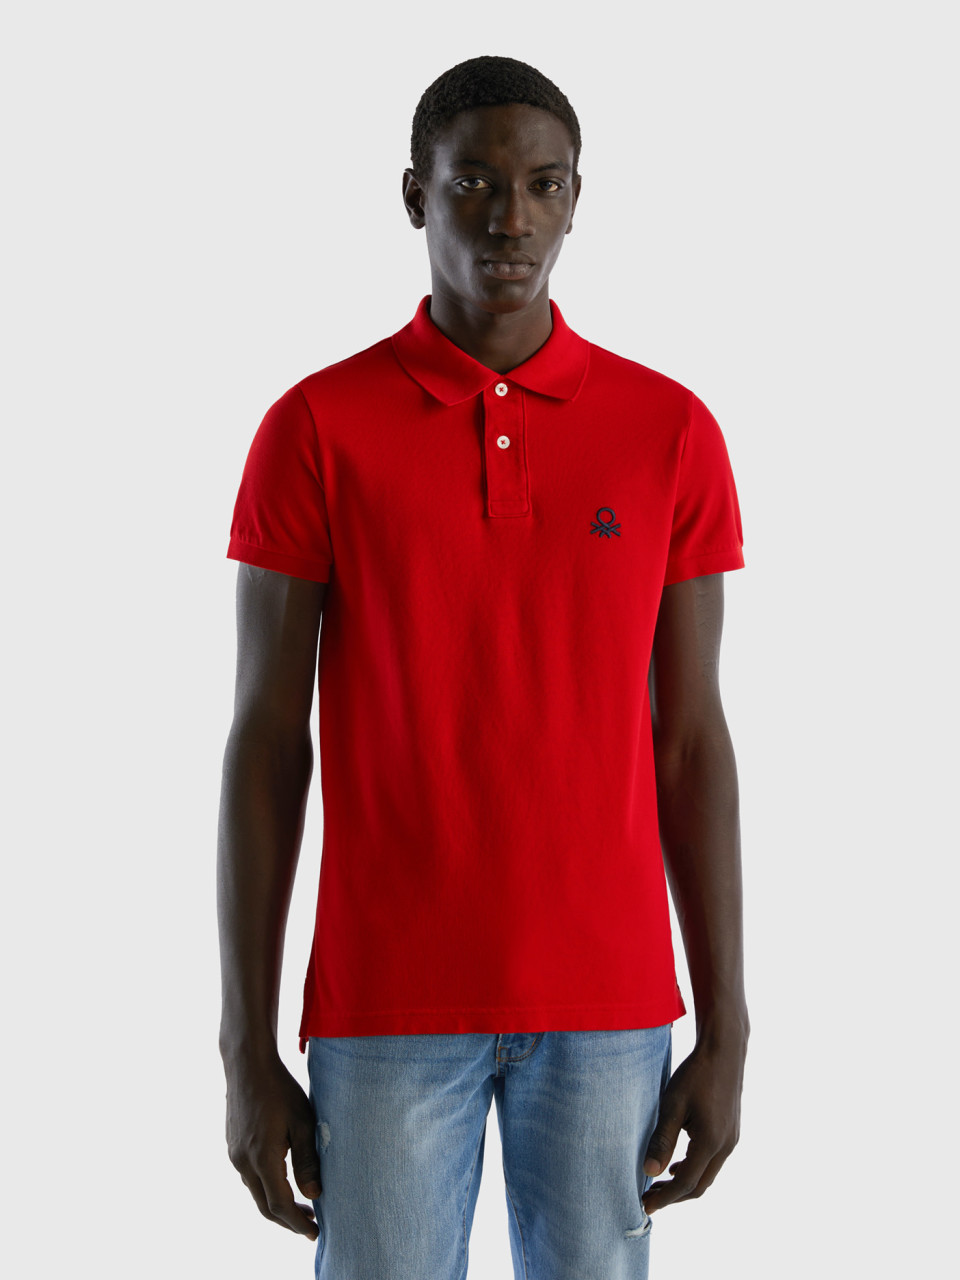 Benetton, Red Slim Fit Polo, Red, Men